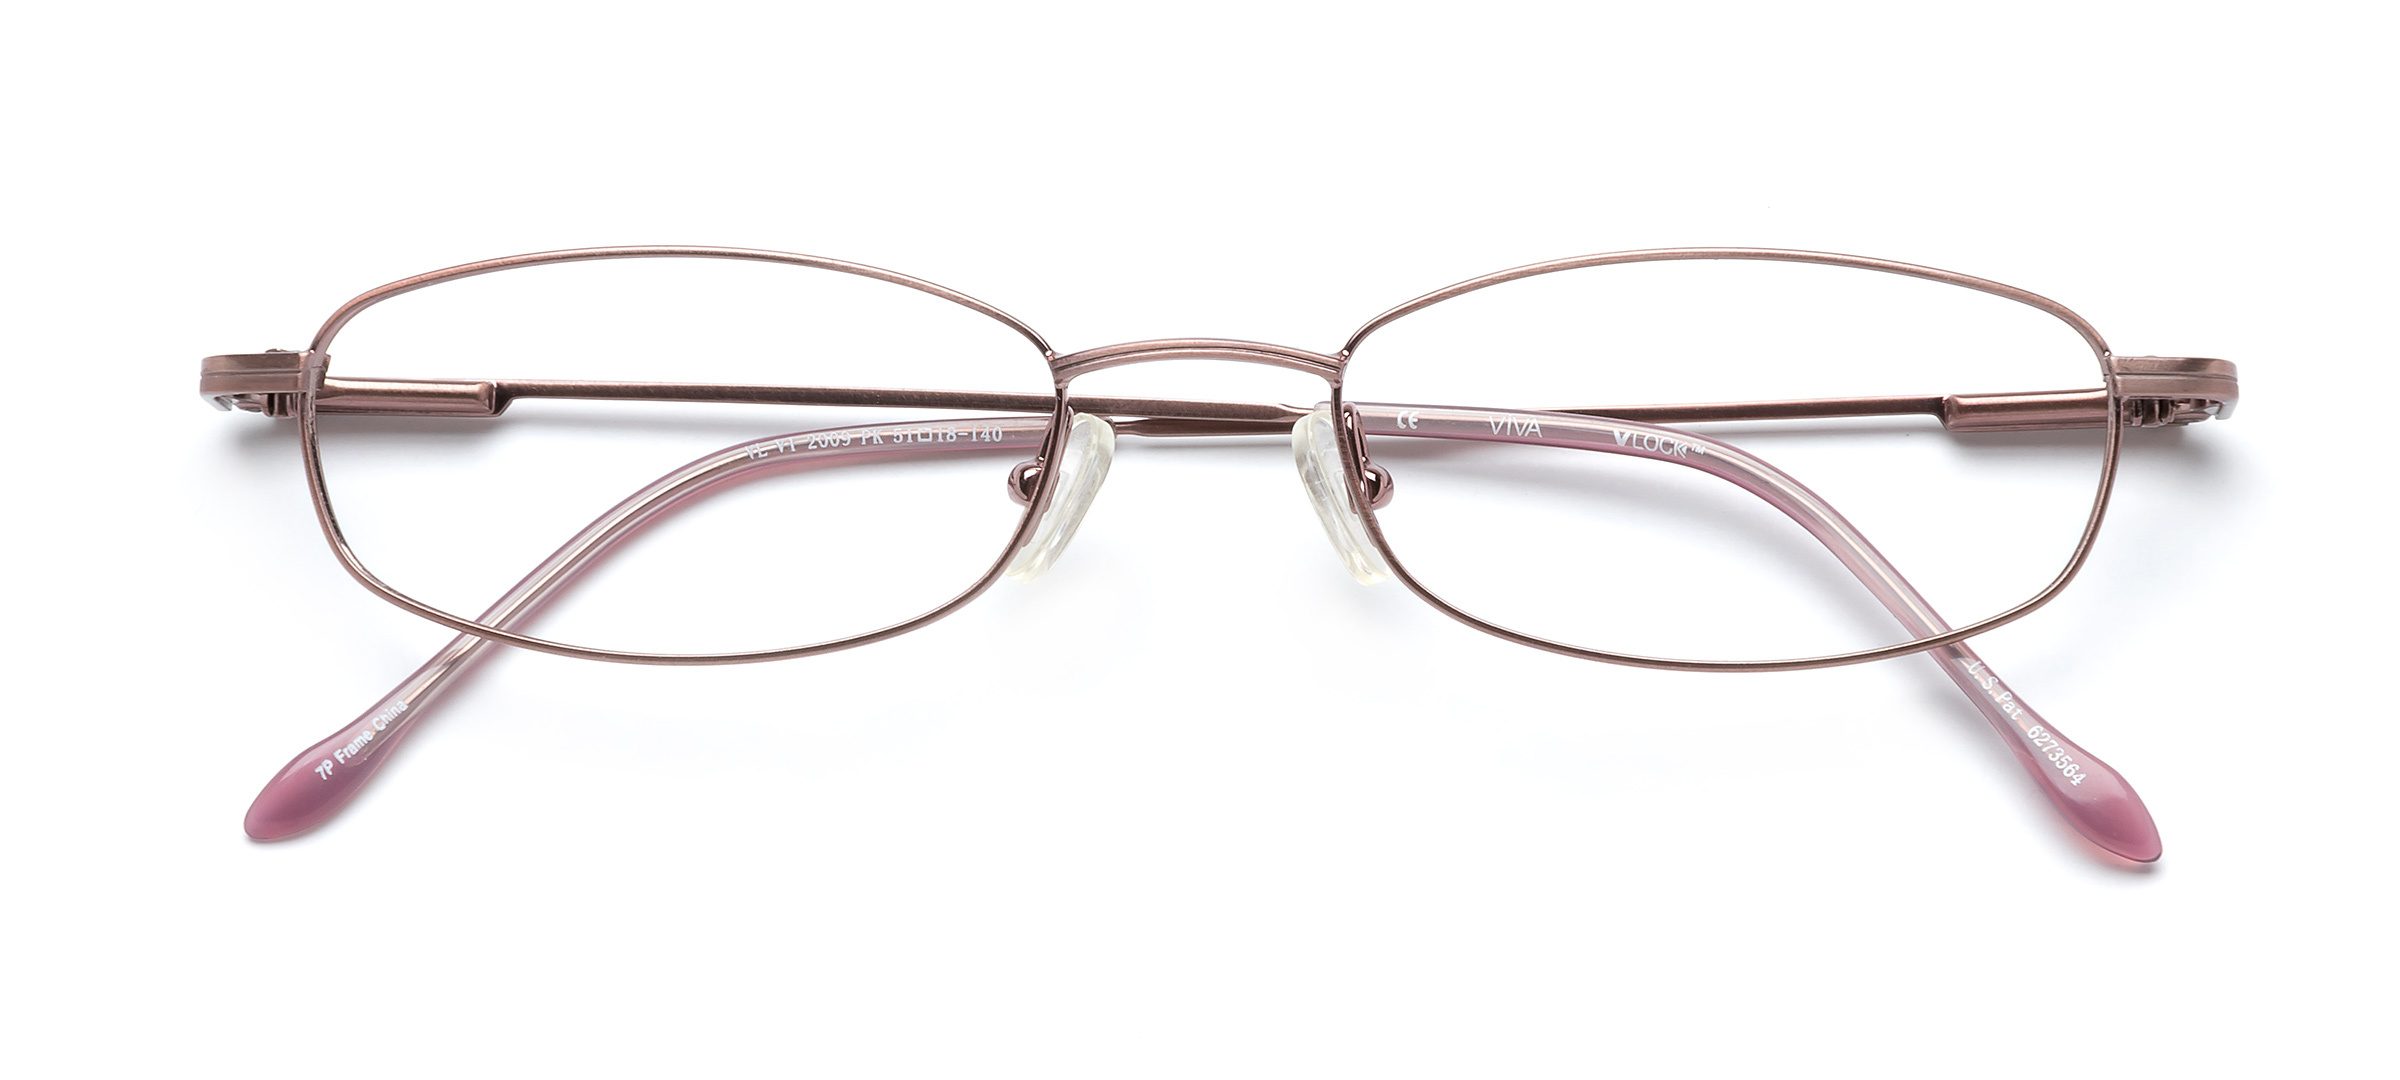 Oval Glasses - buy oval frame eyeglasses online | Clearly.ca